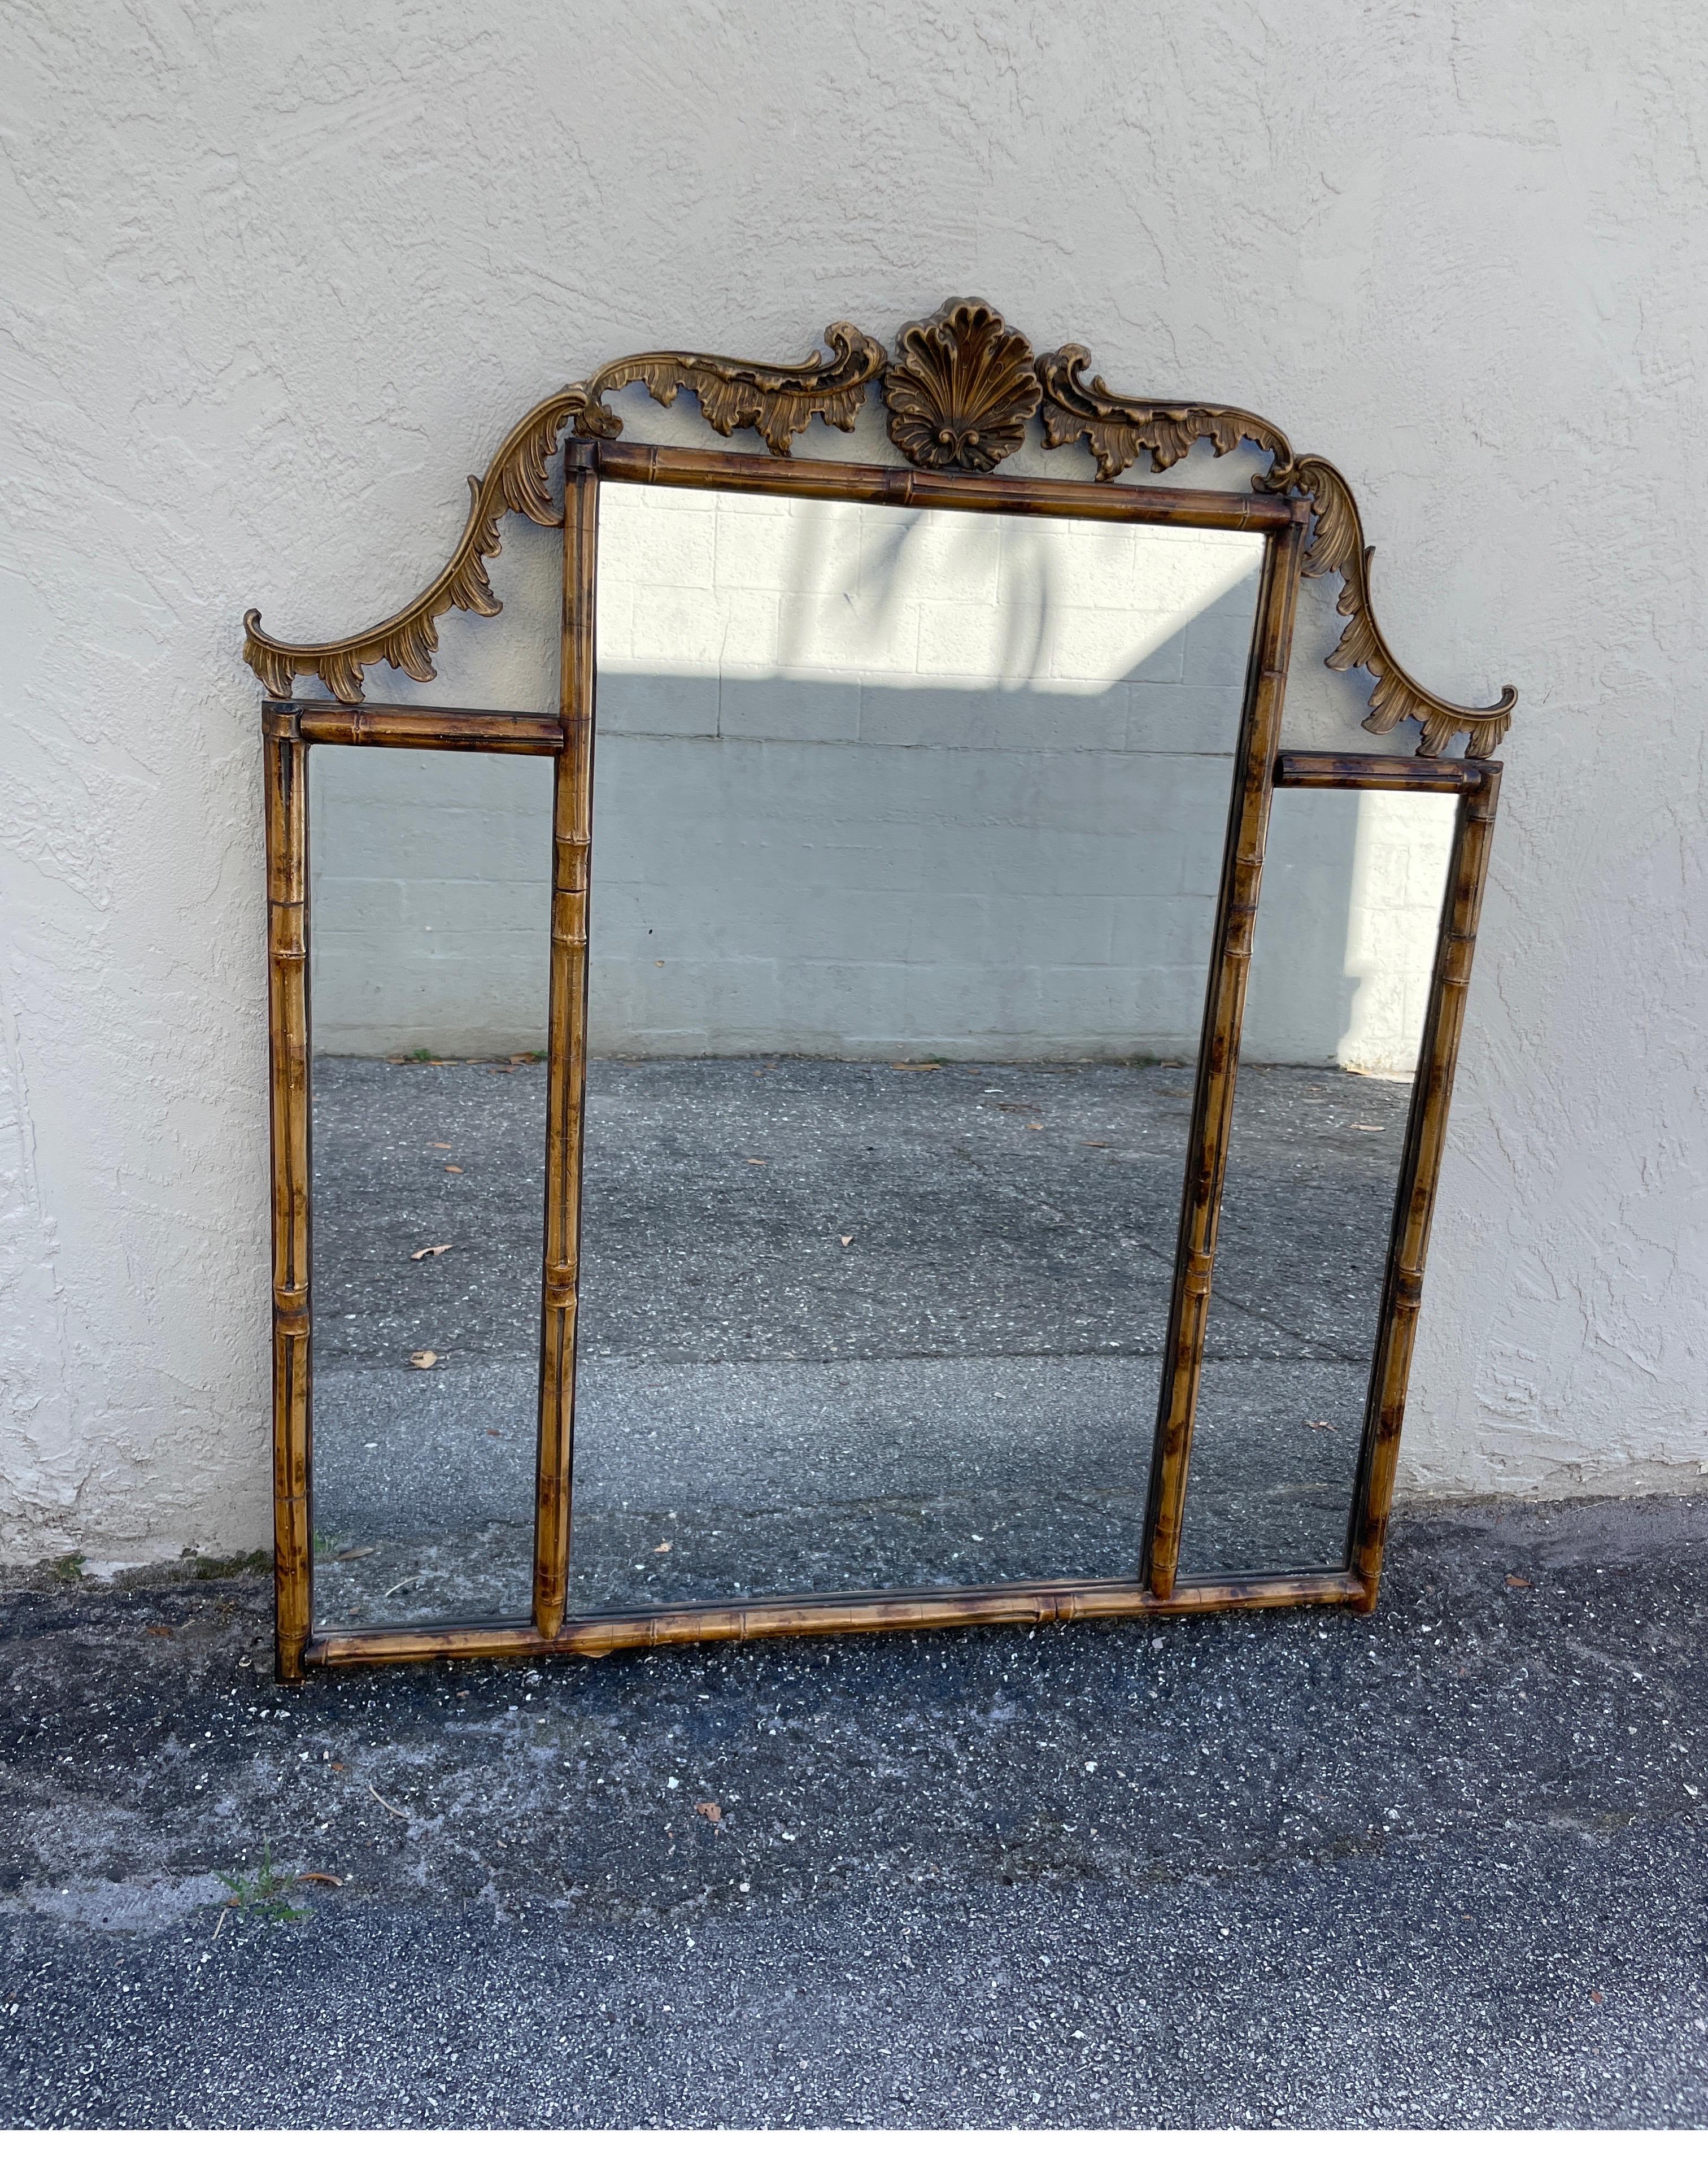 19th century bamboo over mantel mirror. This mirror consists of three bamboo framed panels with a detailed cornice on top. Crowned in the middle with a shell. A rare and unique mirror that will be outstanding wherever you place it.